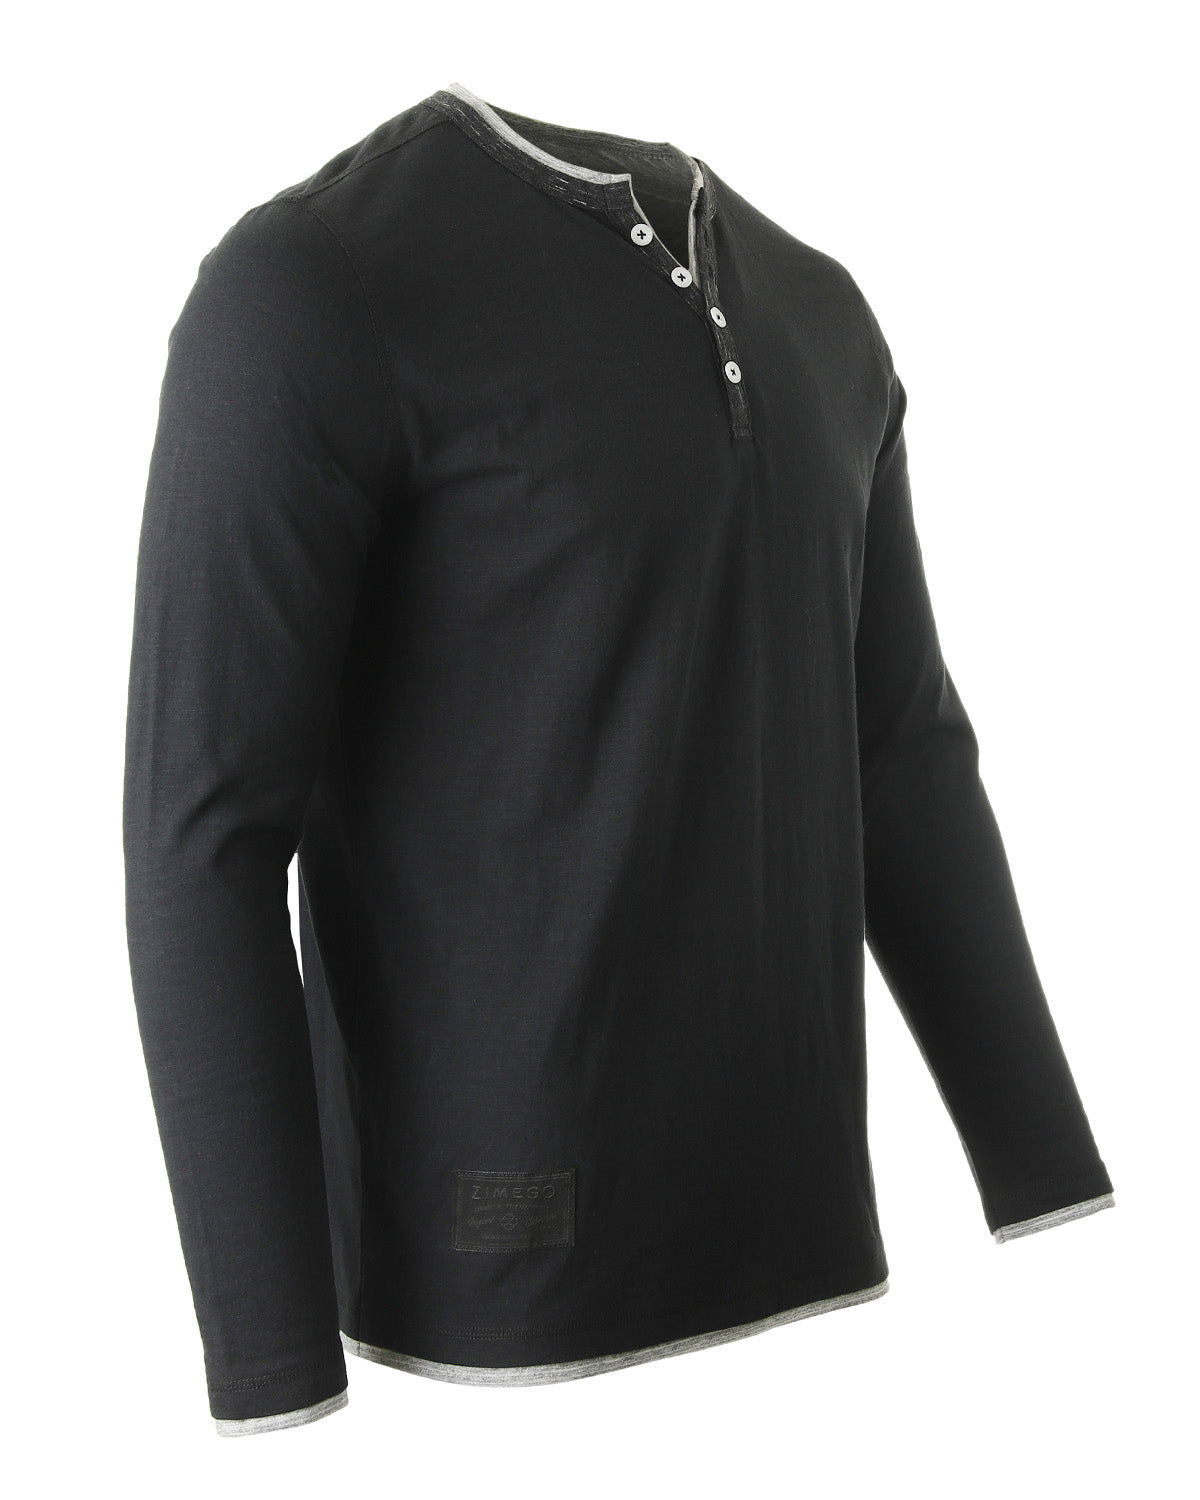 Men’s Long Sleeve Double Layered Y-Neck Fashion Henley